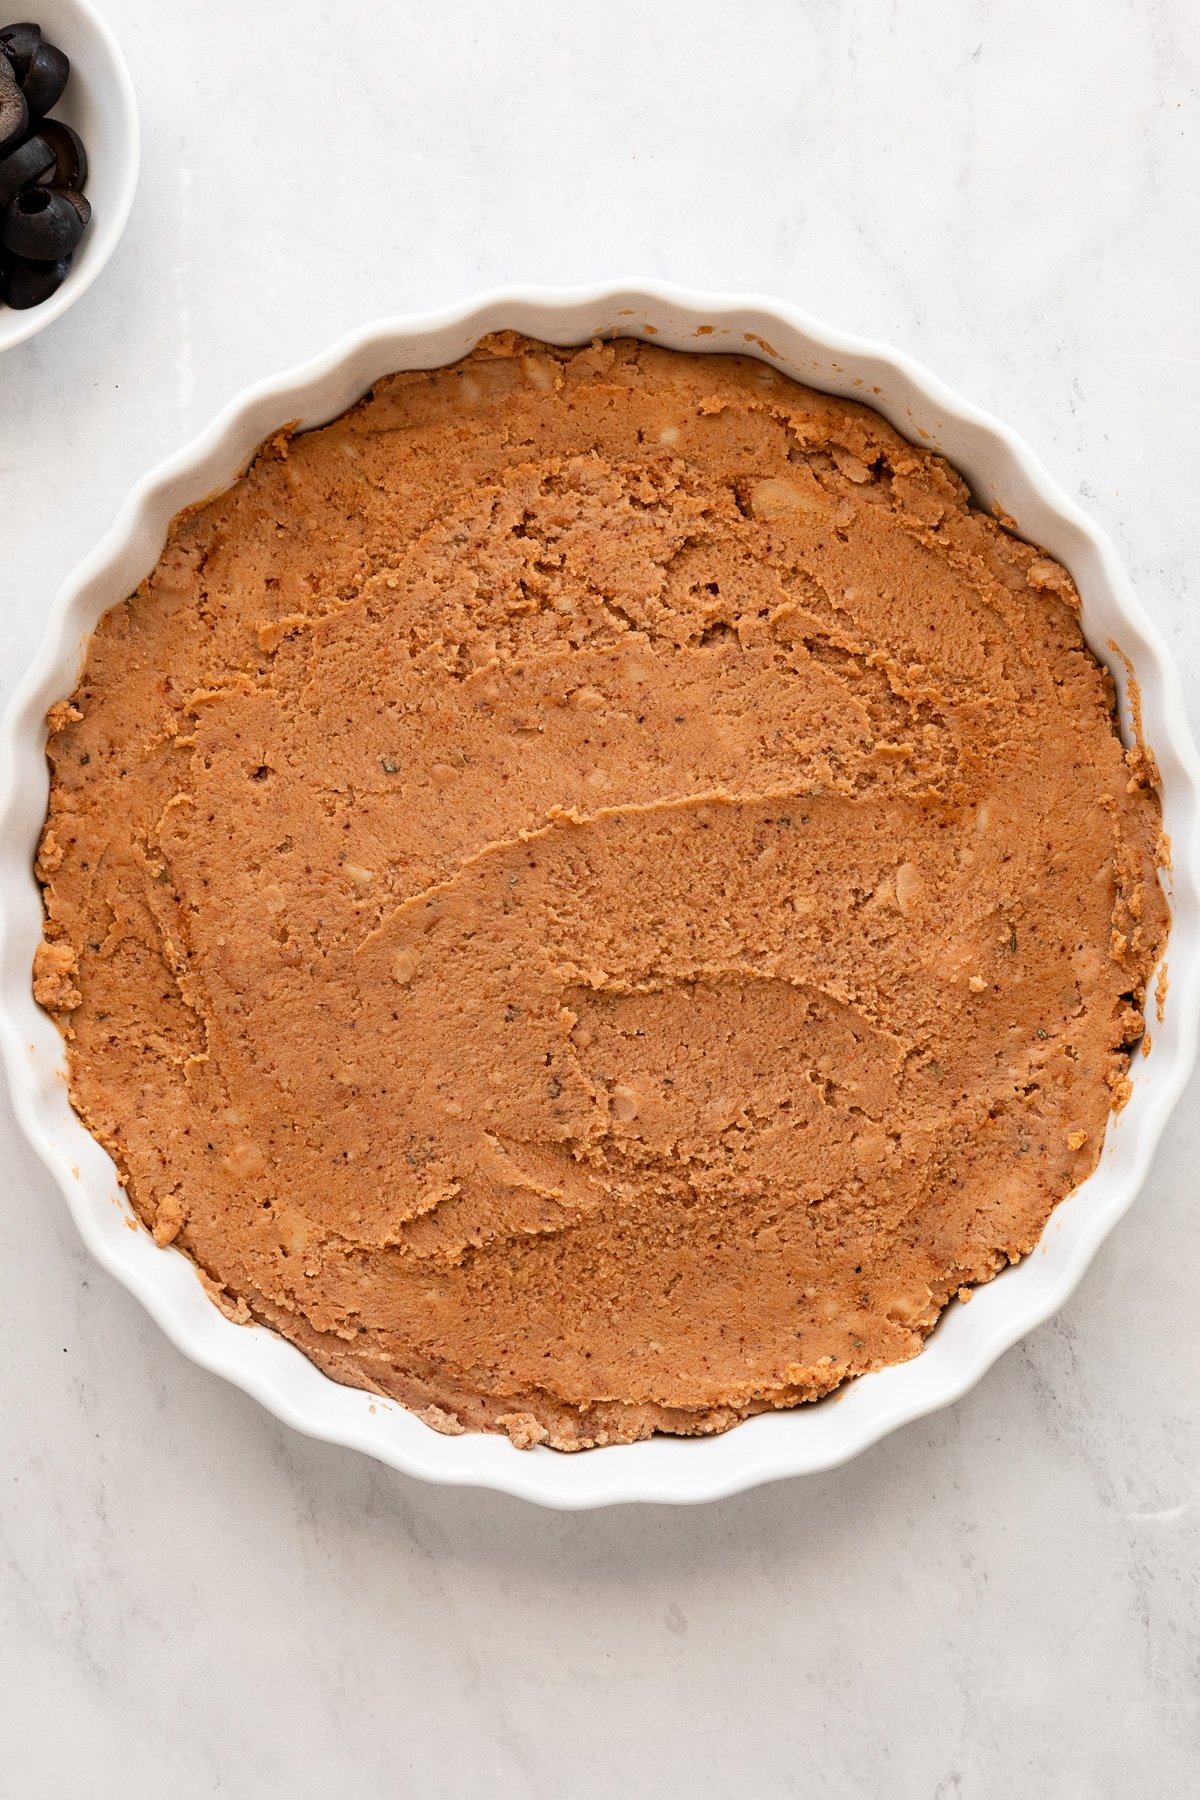 Tart pan with refried beans spread on bottom.